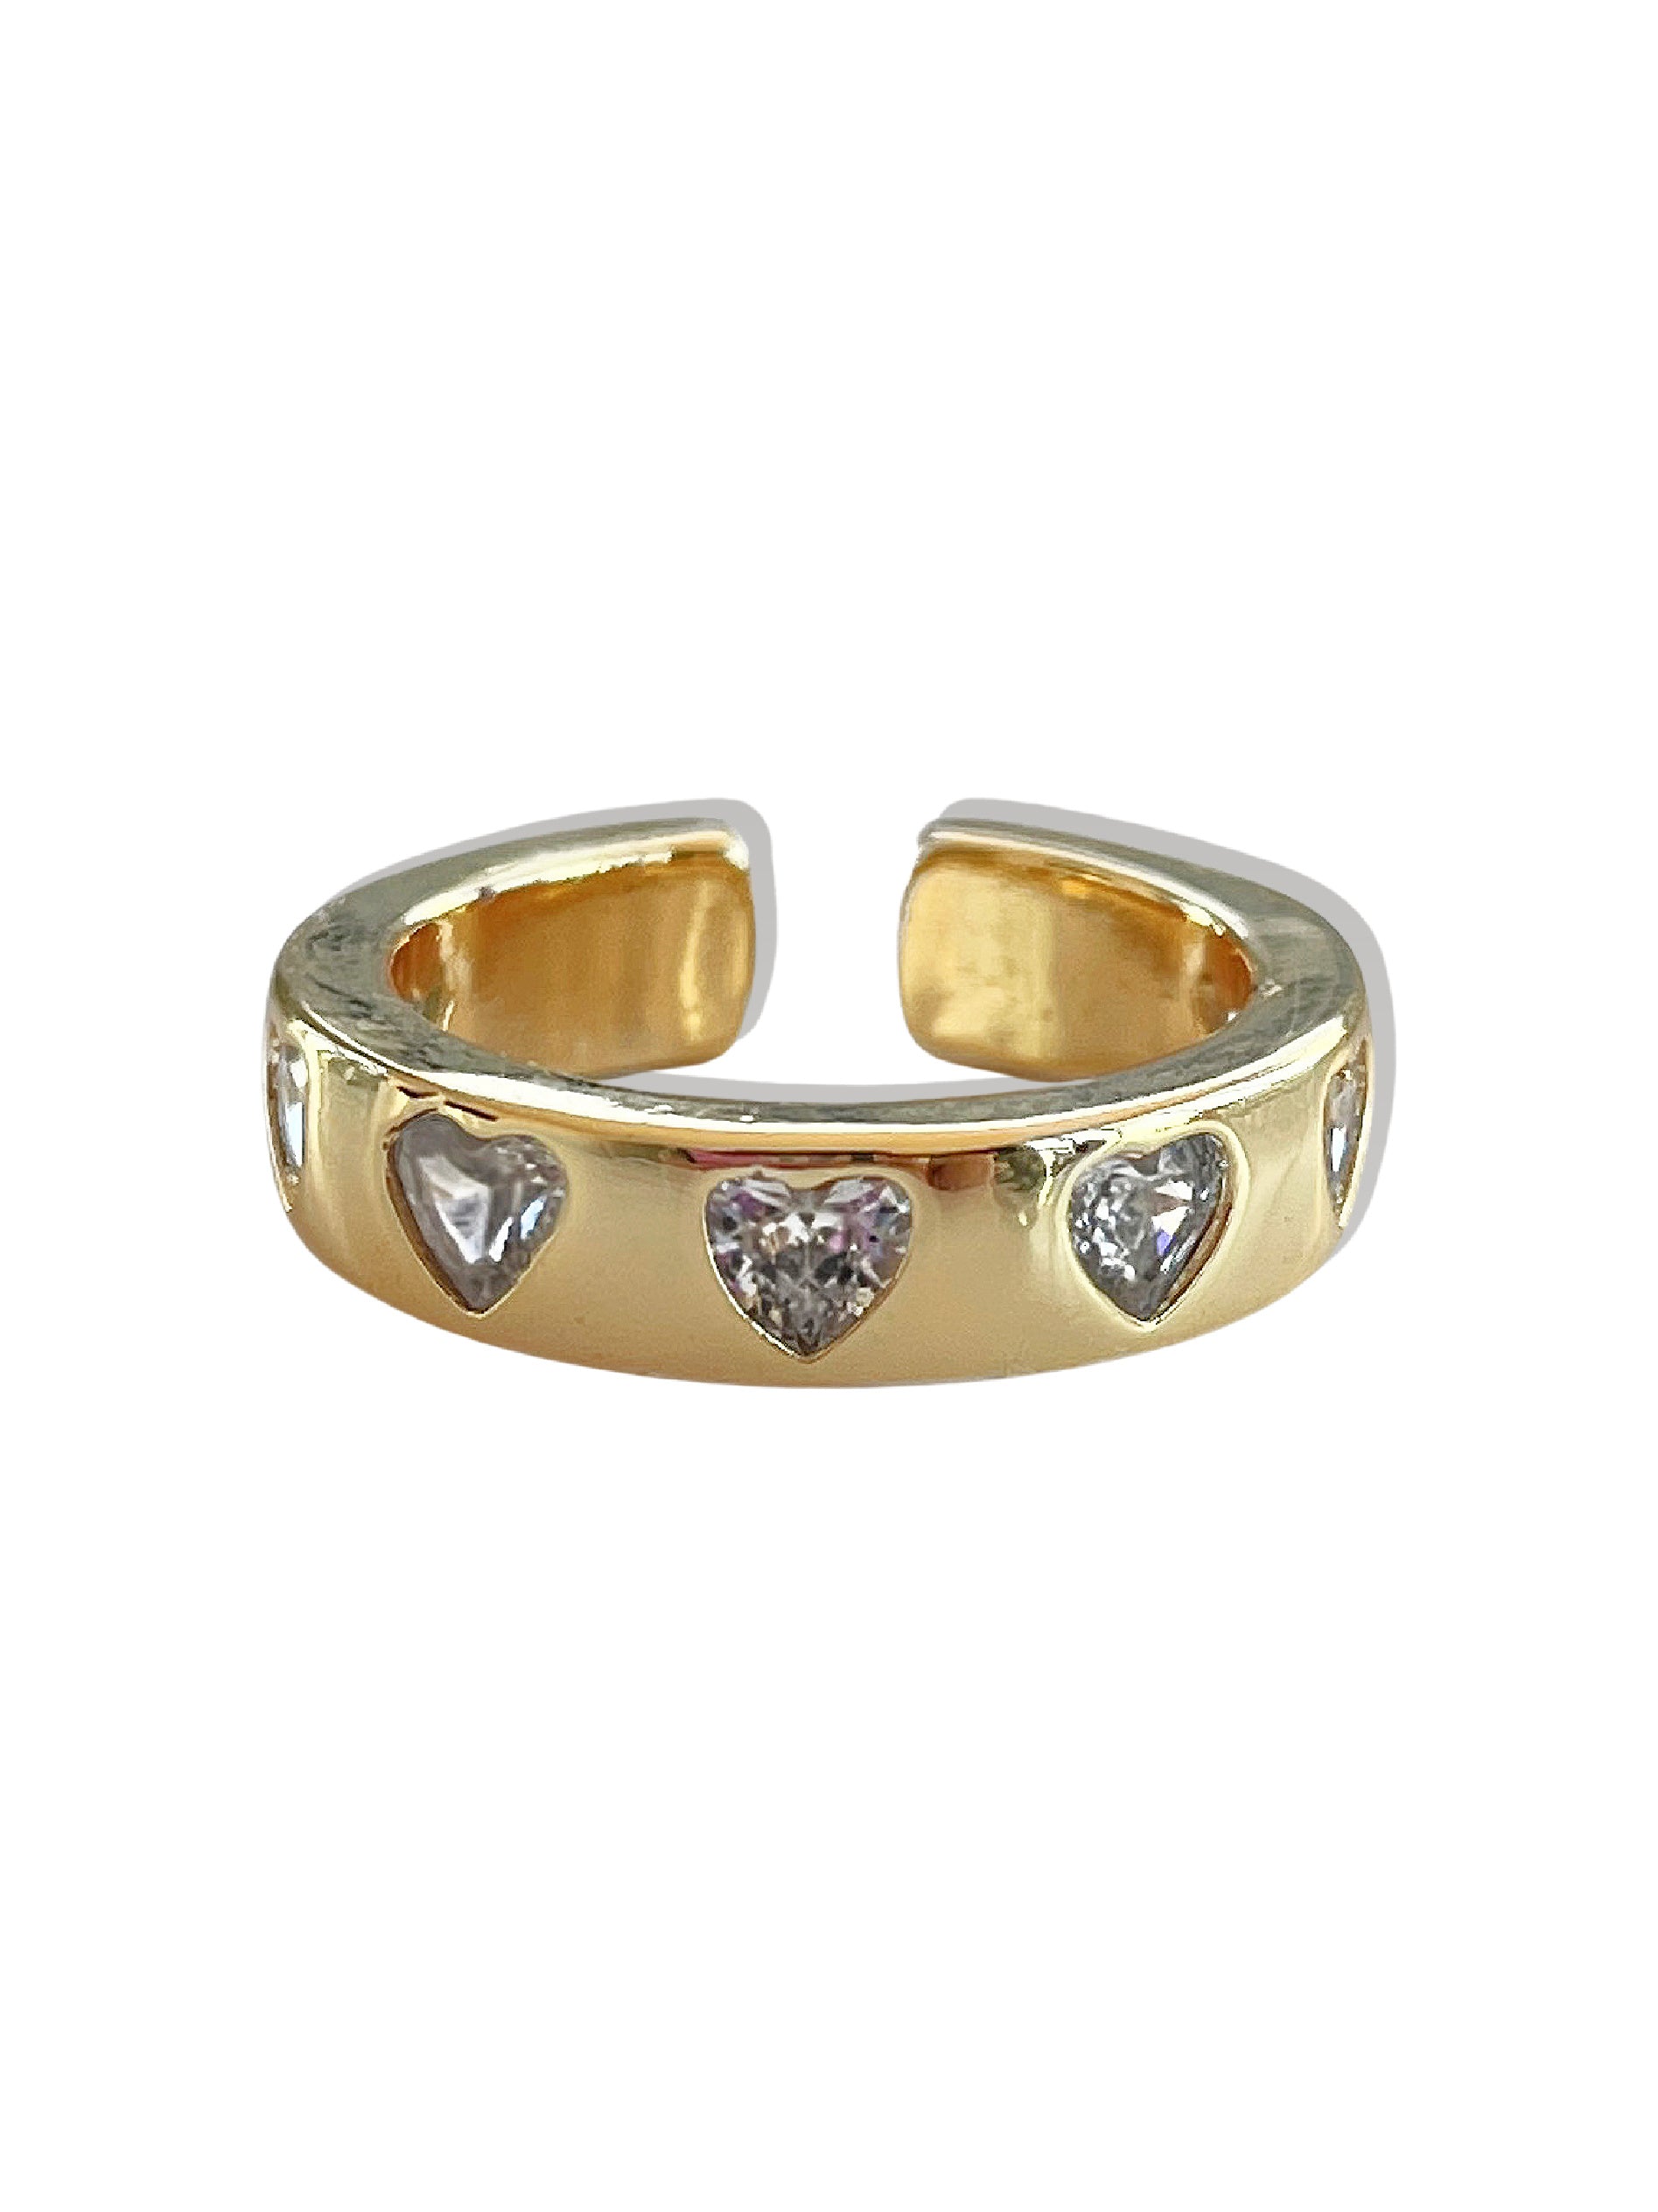 CURRENTLY IN LOVE GOLD HEART RING